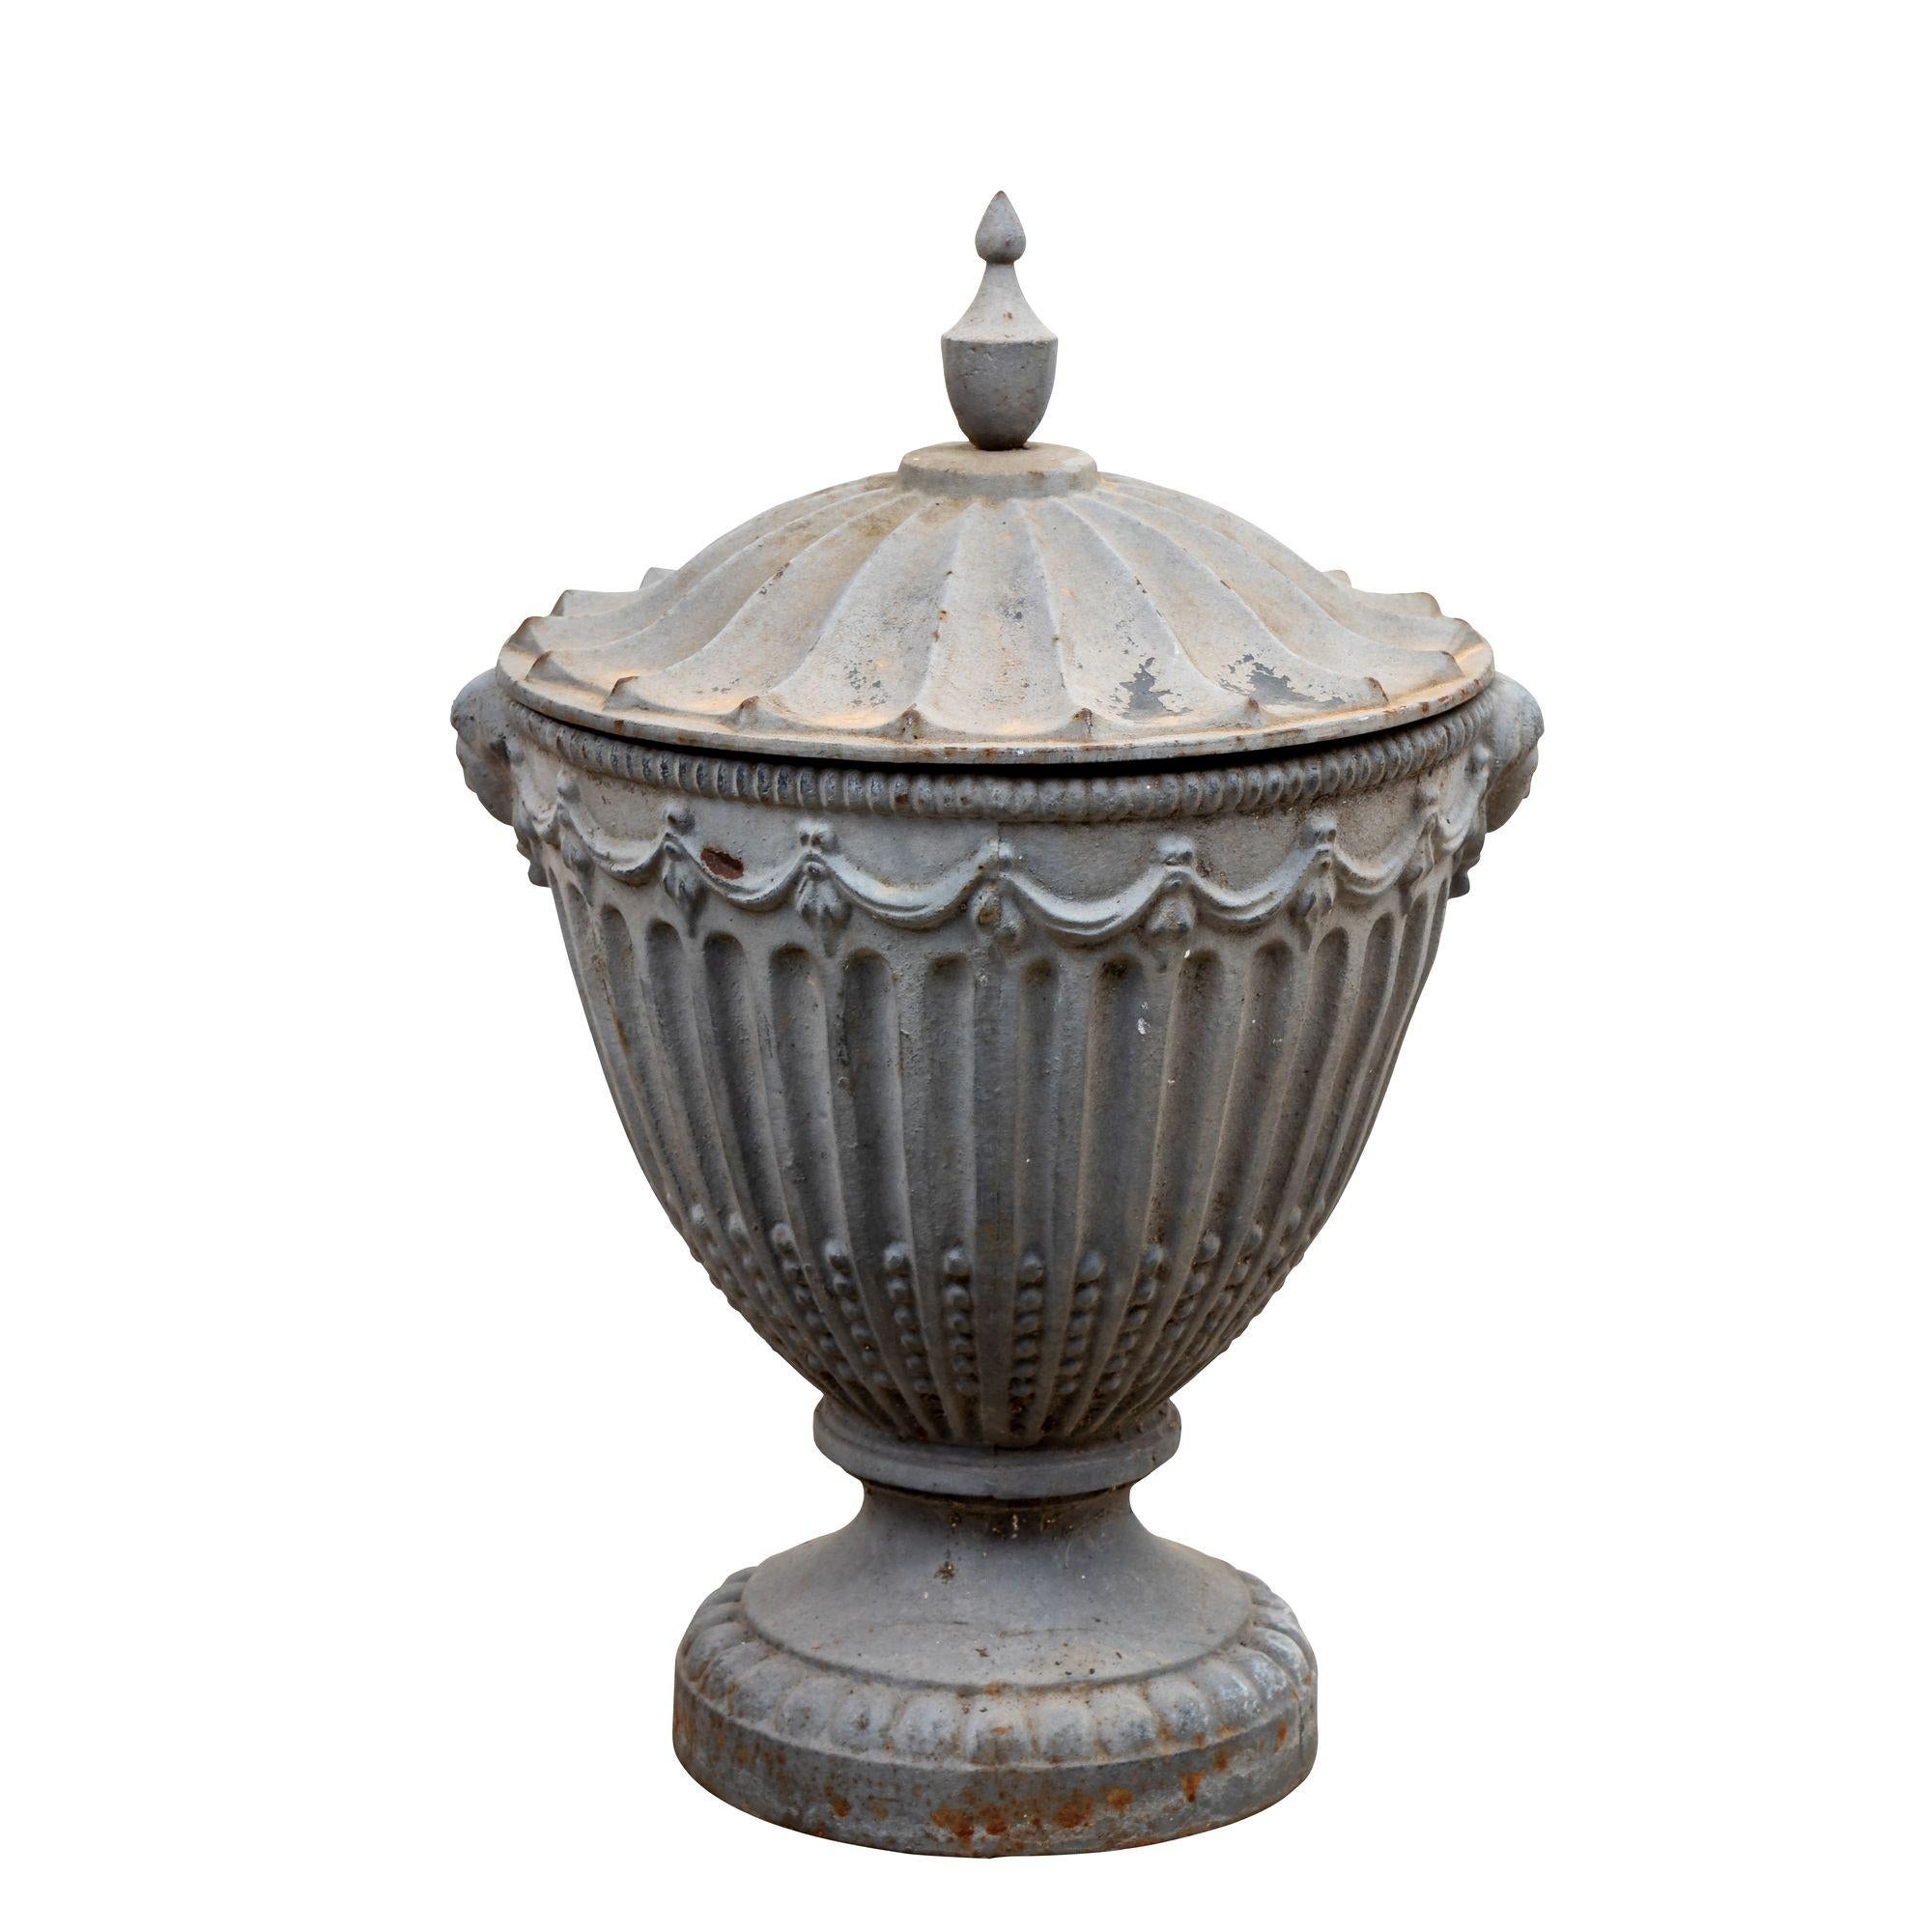 Exuding timeless elegance, this exceptional pair of lidded urns hails from 19th century England, possibly originating from an esteemed estate or country manor. Crafted during the 1860s, these ornate urns are painted to imitate lead and boast